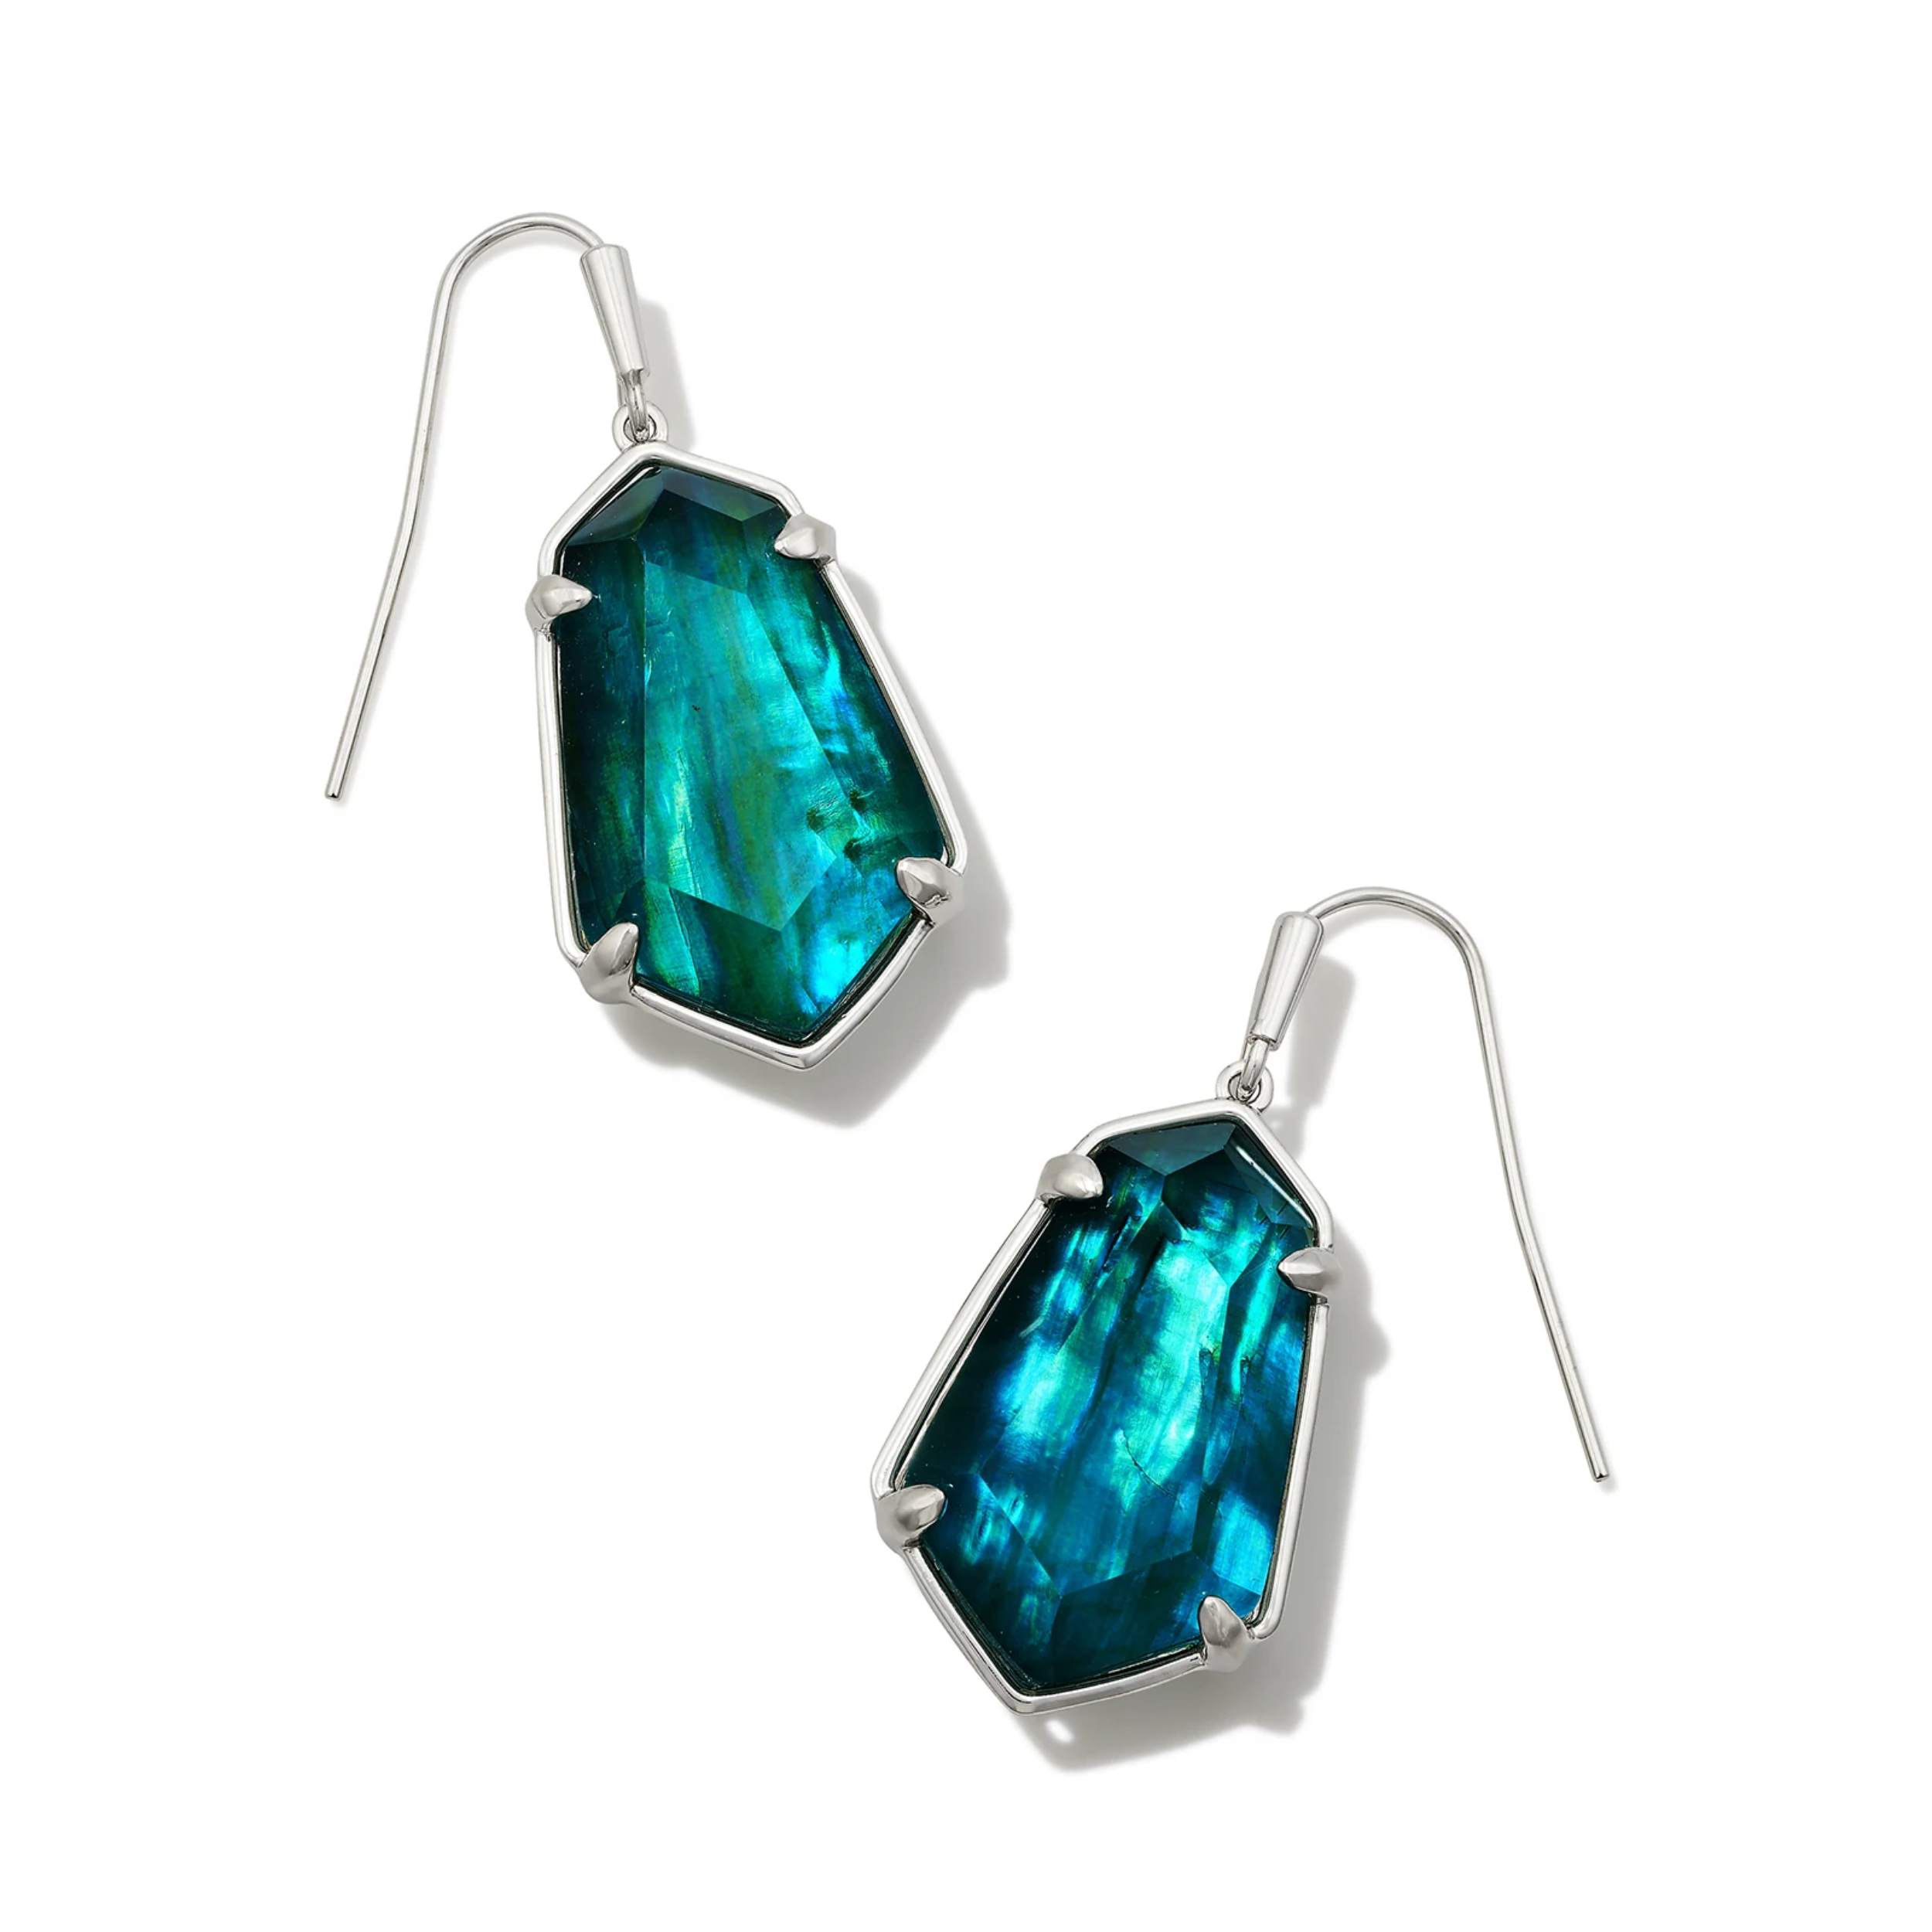 These Alexandria Silver Drop Earrings in Teal Green Illusion by Kendra Scott is pictured on a white background.